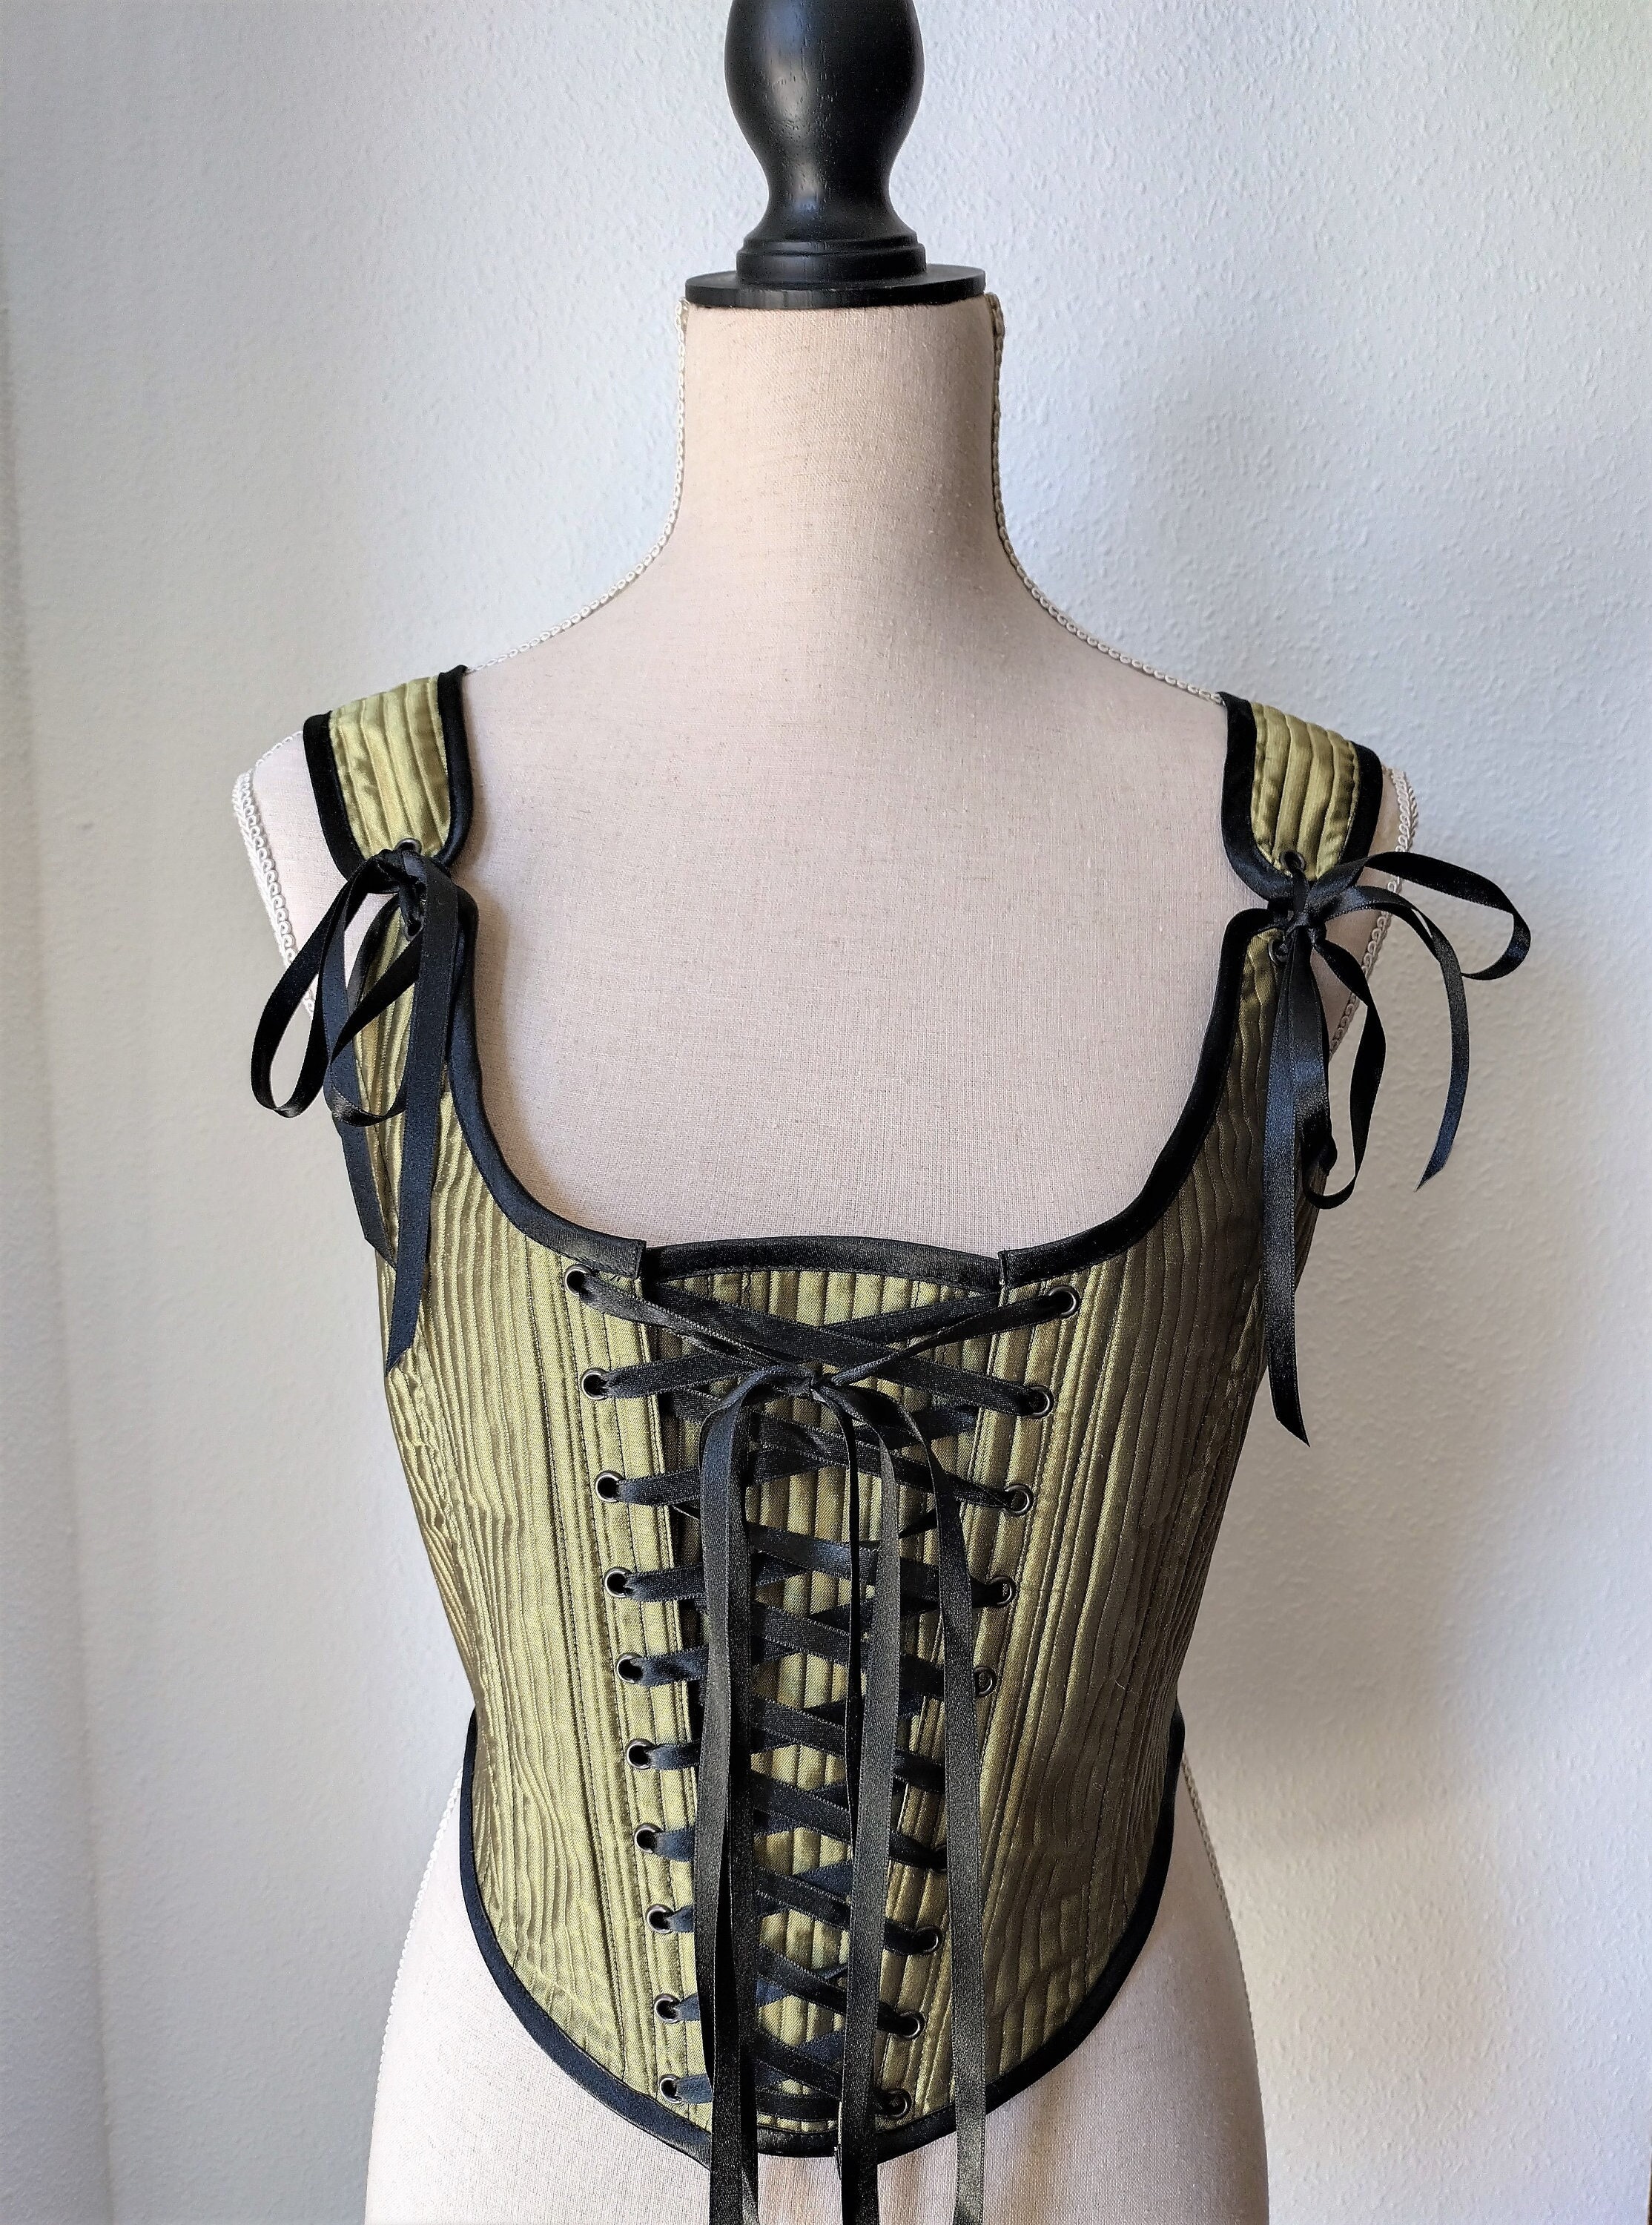 READY TO SHIP Handcrafted Renaissance Style Bodice Corset in Olive